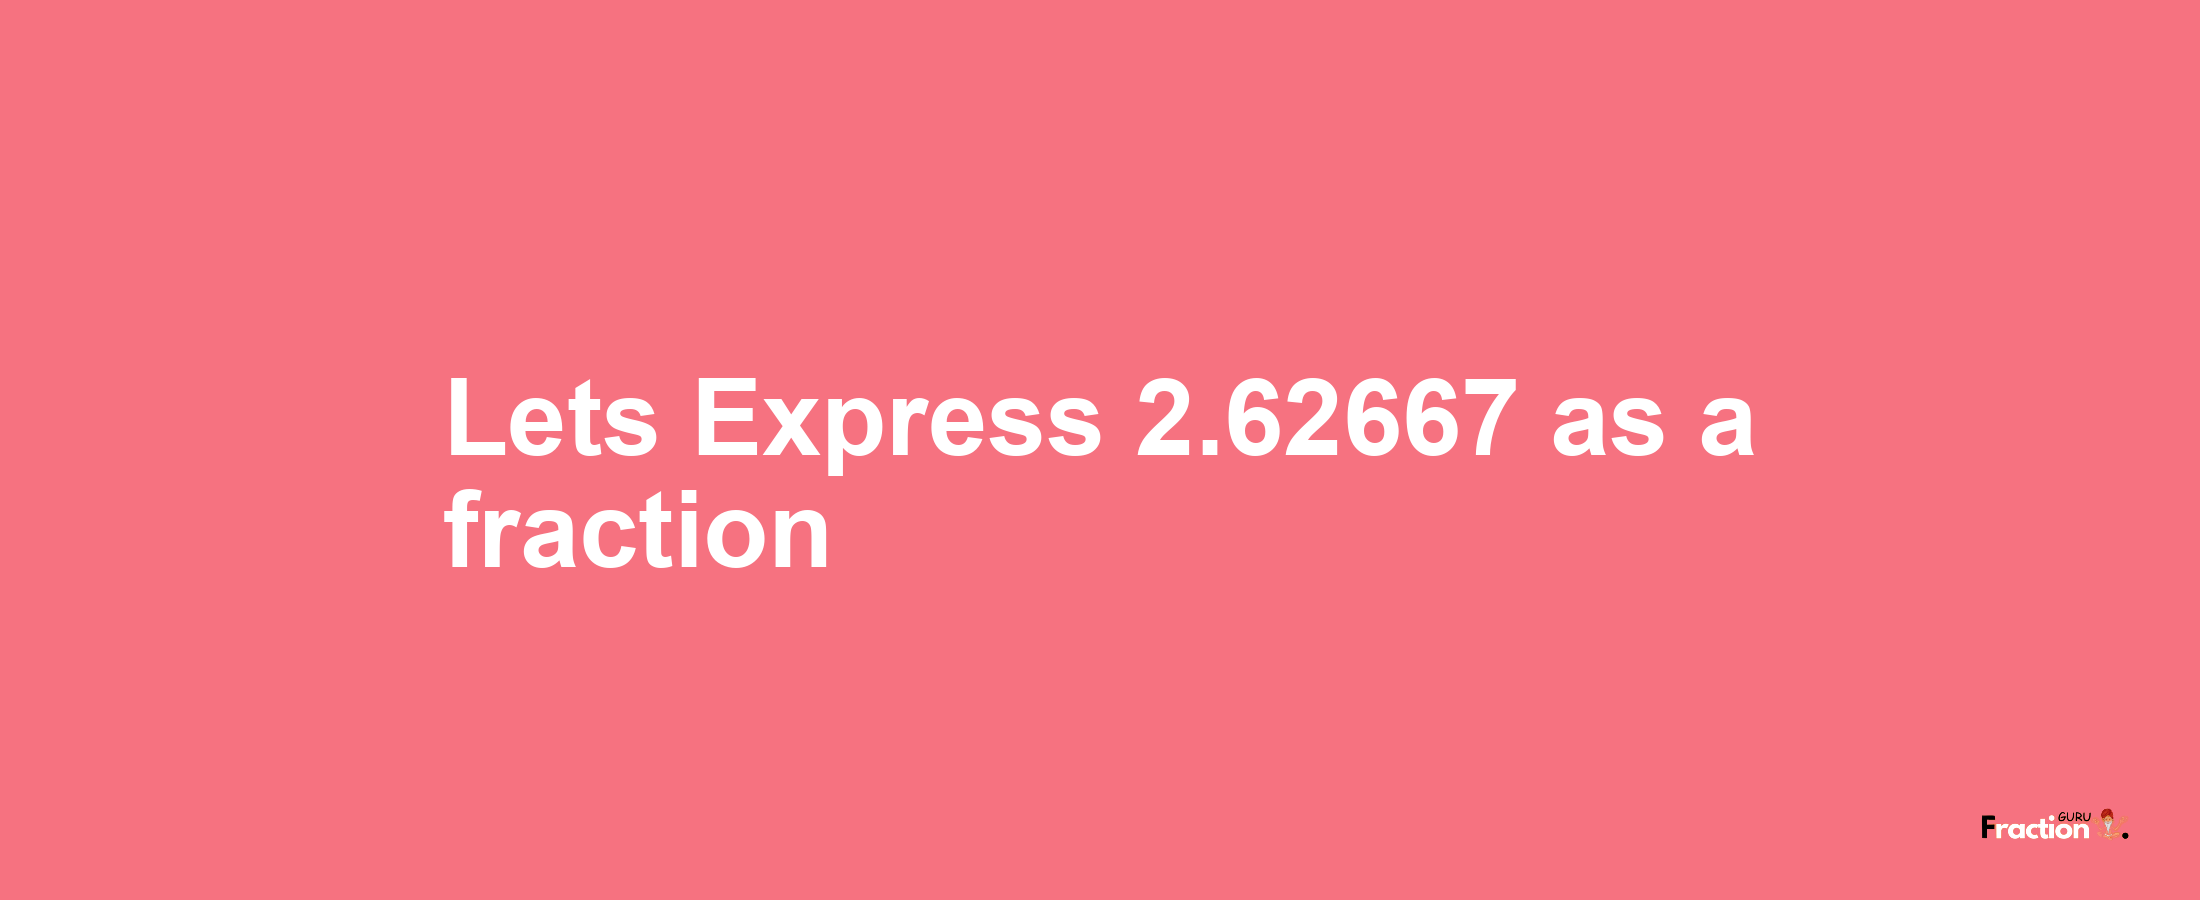 Lets Express 2.62667 as afraction